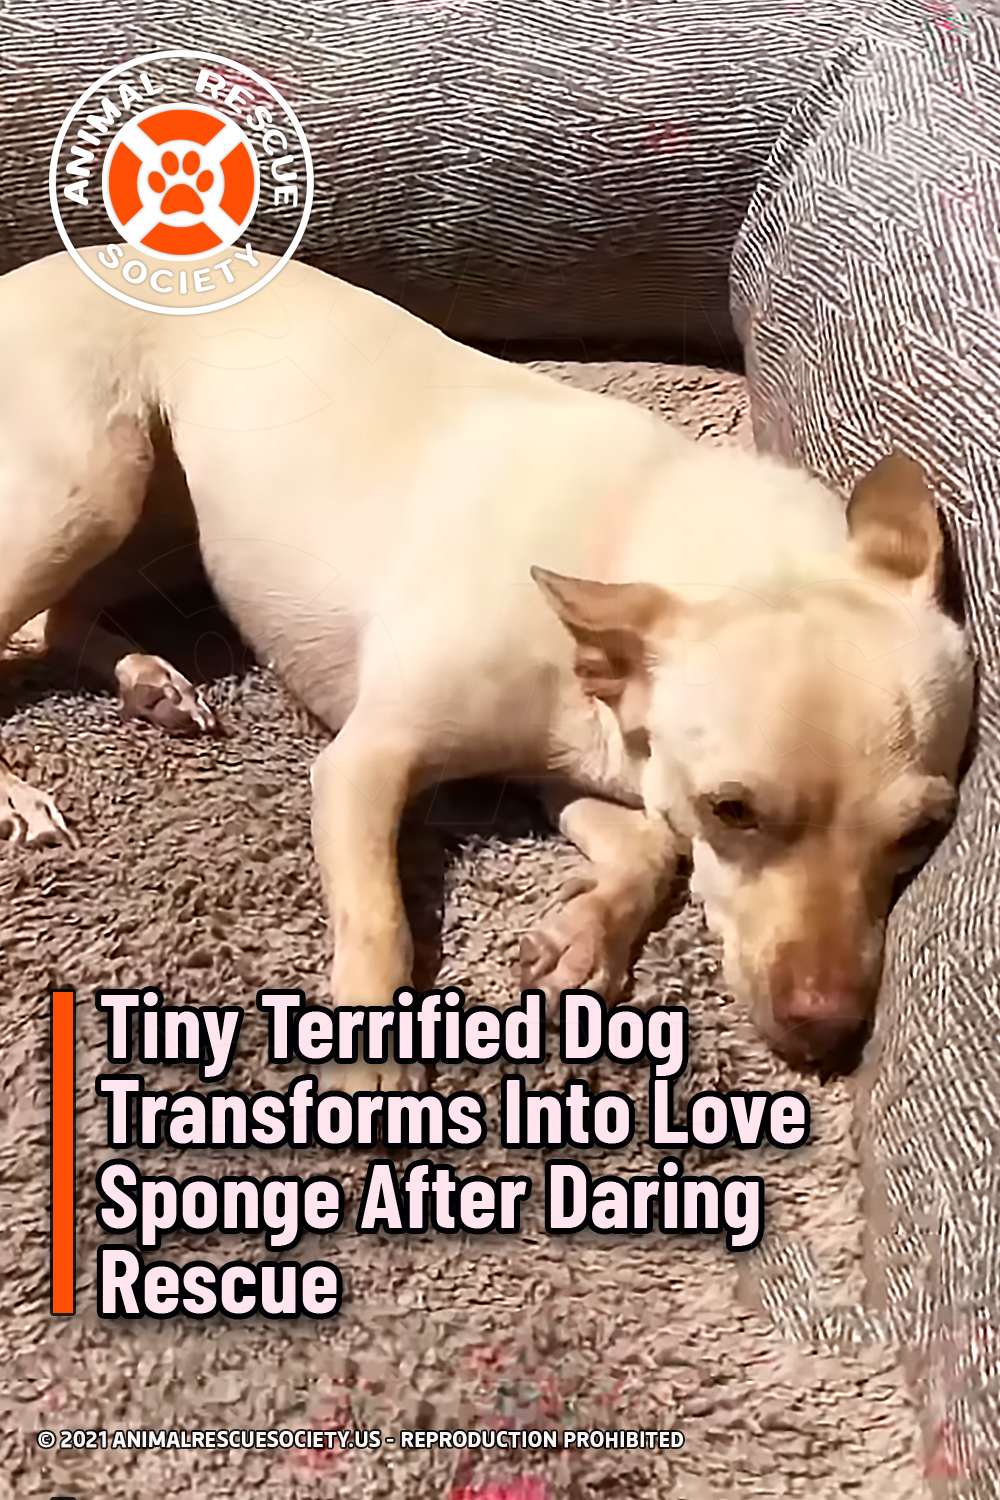 Tiny Terrified Dog Transforms Into Love Sponge After Daring Rescue